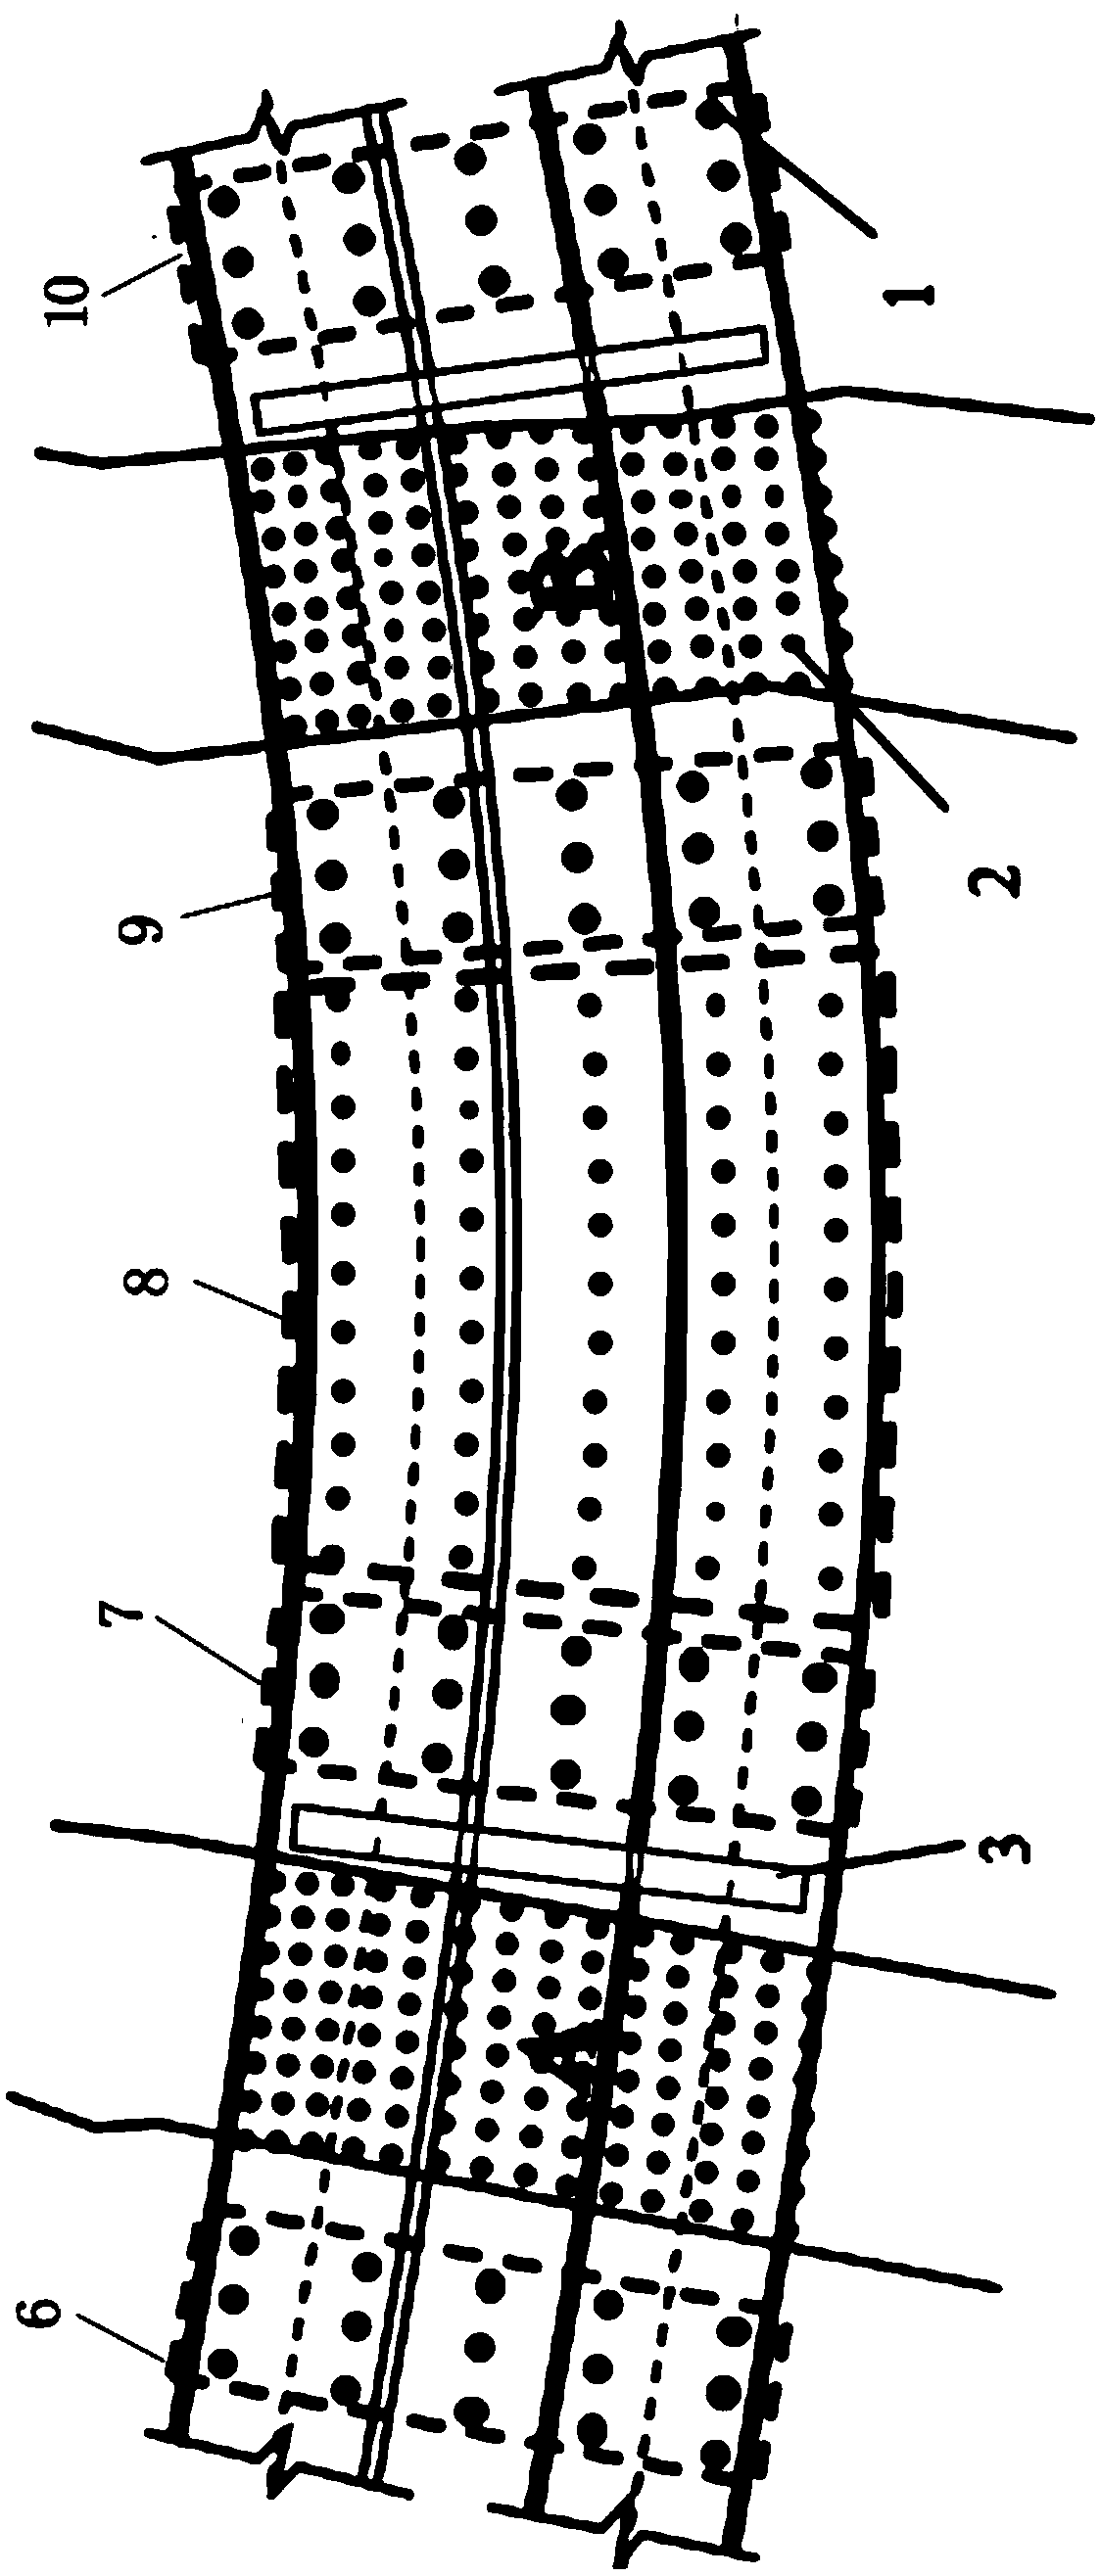 Construction method using collapse region as subway tunnel foundation